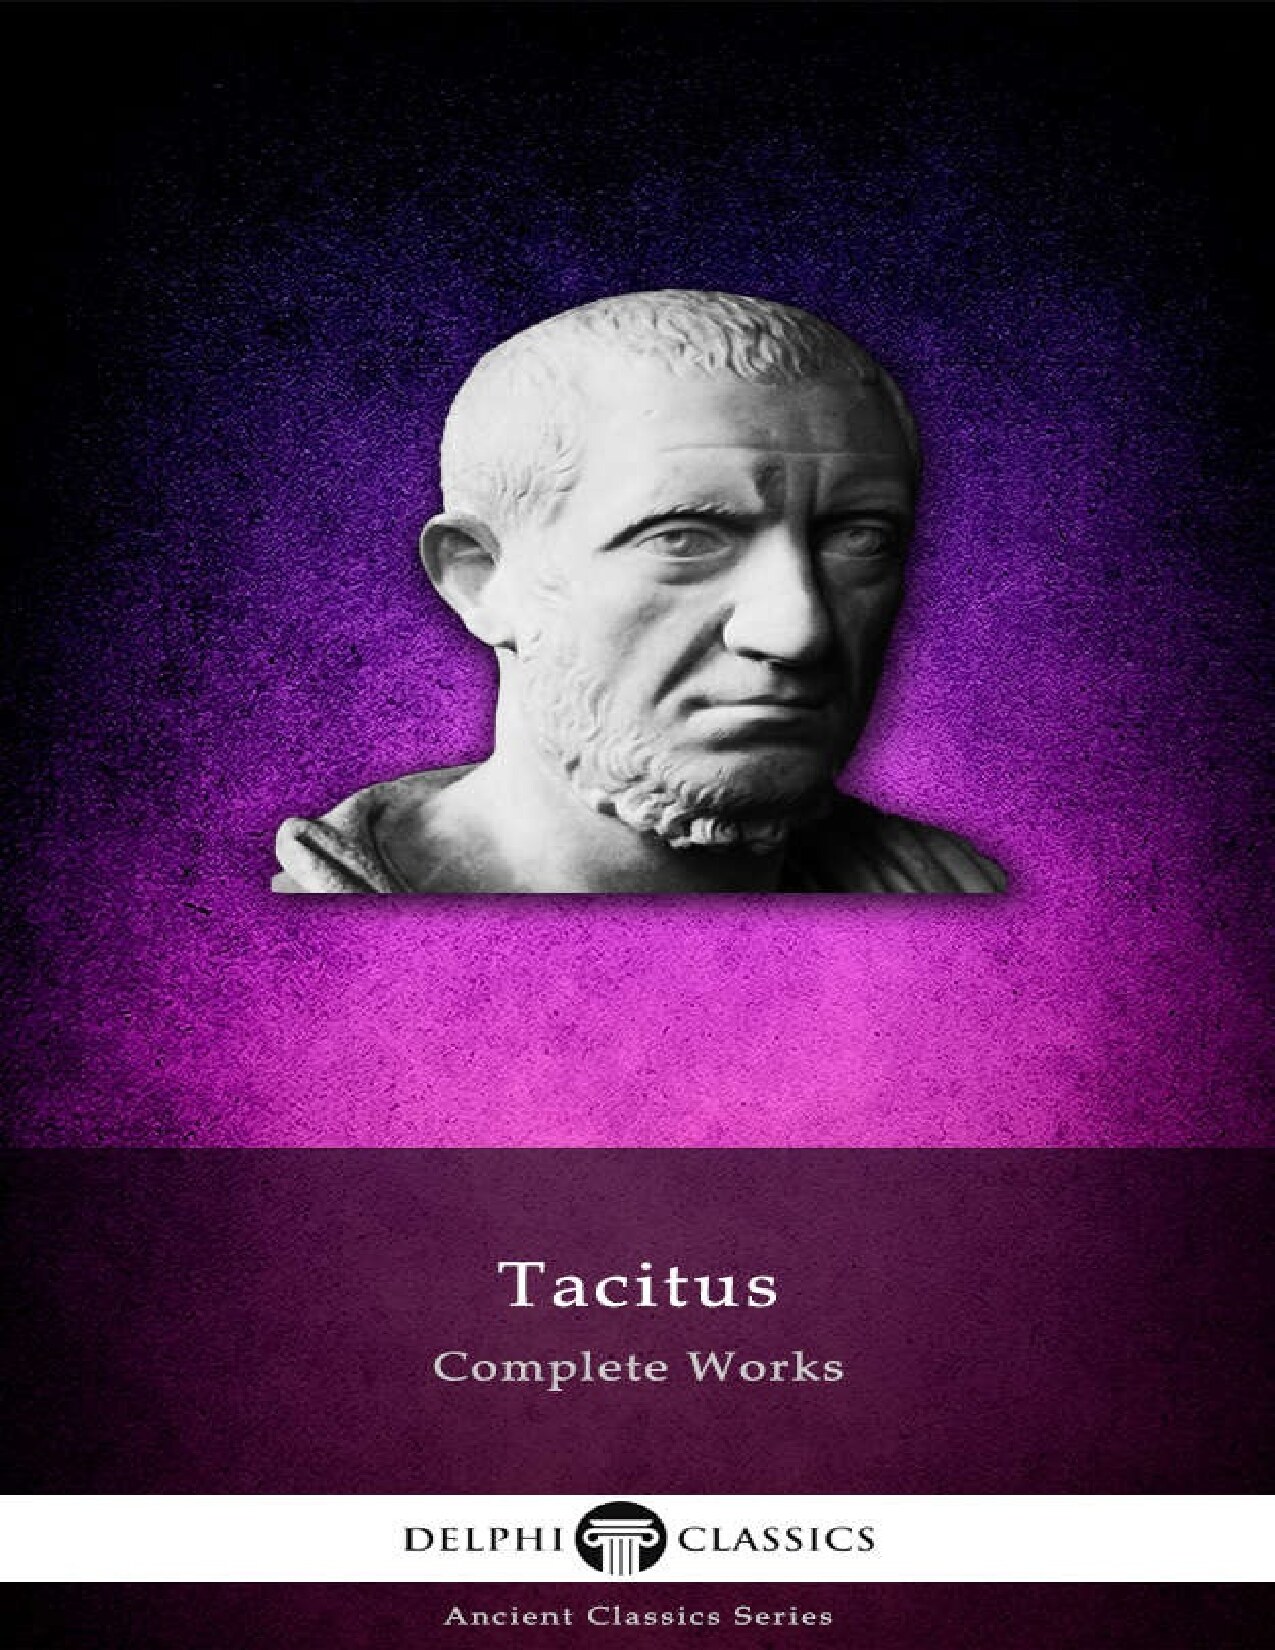 Delphi Complete Works of Tacitus (Illustrated)